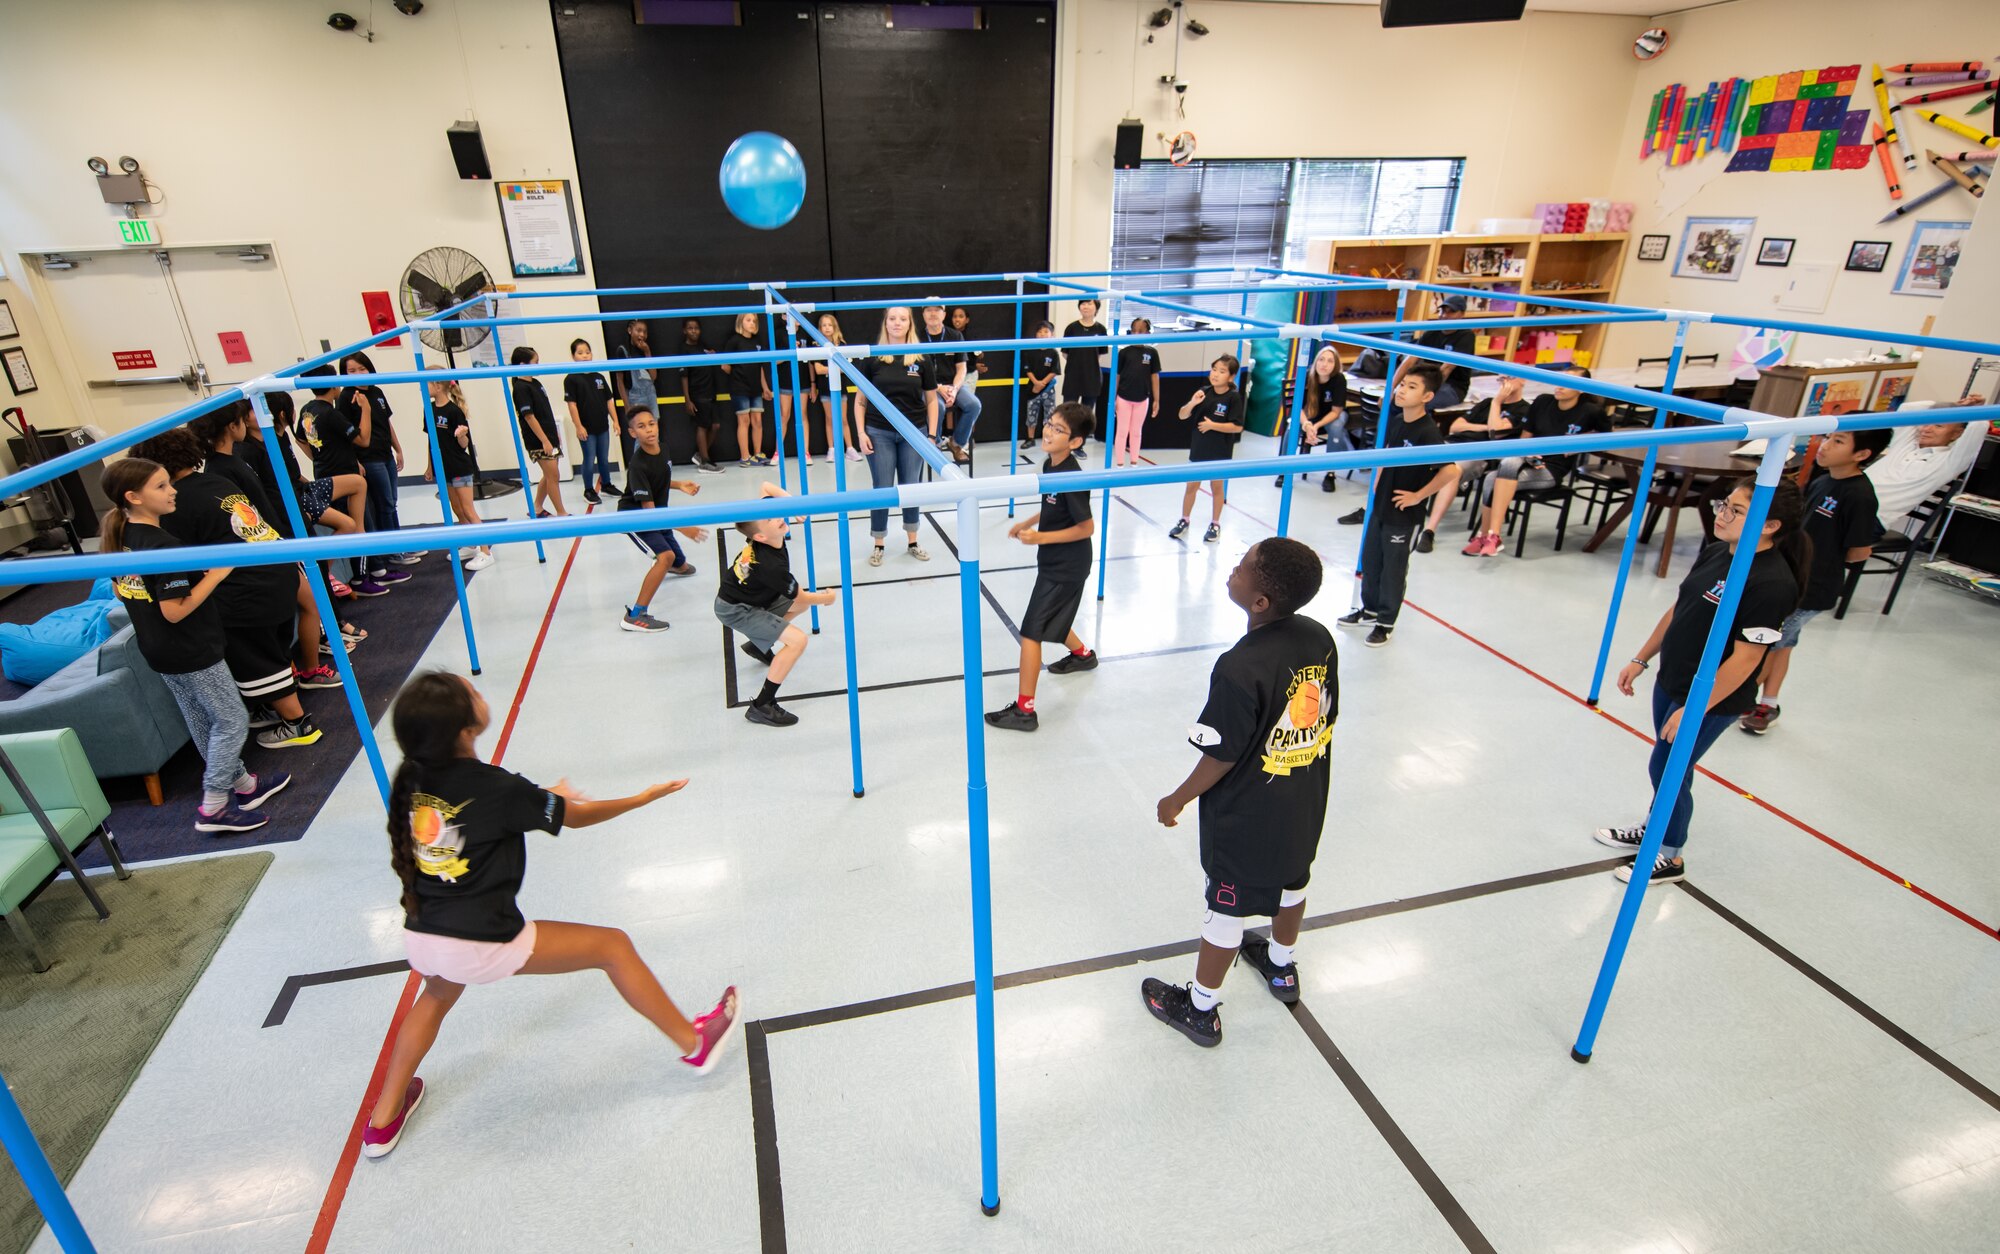 Children from Okinawa and the Kadena Youth Center play nine square in the air during Cultural Exchange Day Sept. 28, 2019, at Kadena Air Base, Japan. The children were divided into six teams to play a variety of games, learn about each other’s culture and develop friendships. (U.S. Air Force photo by Staff Sgt. Micaiah Anthony)